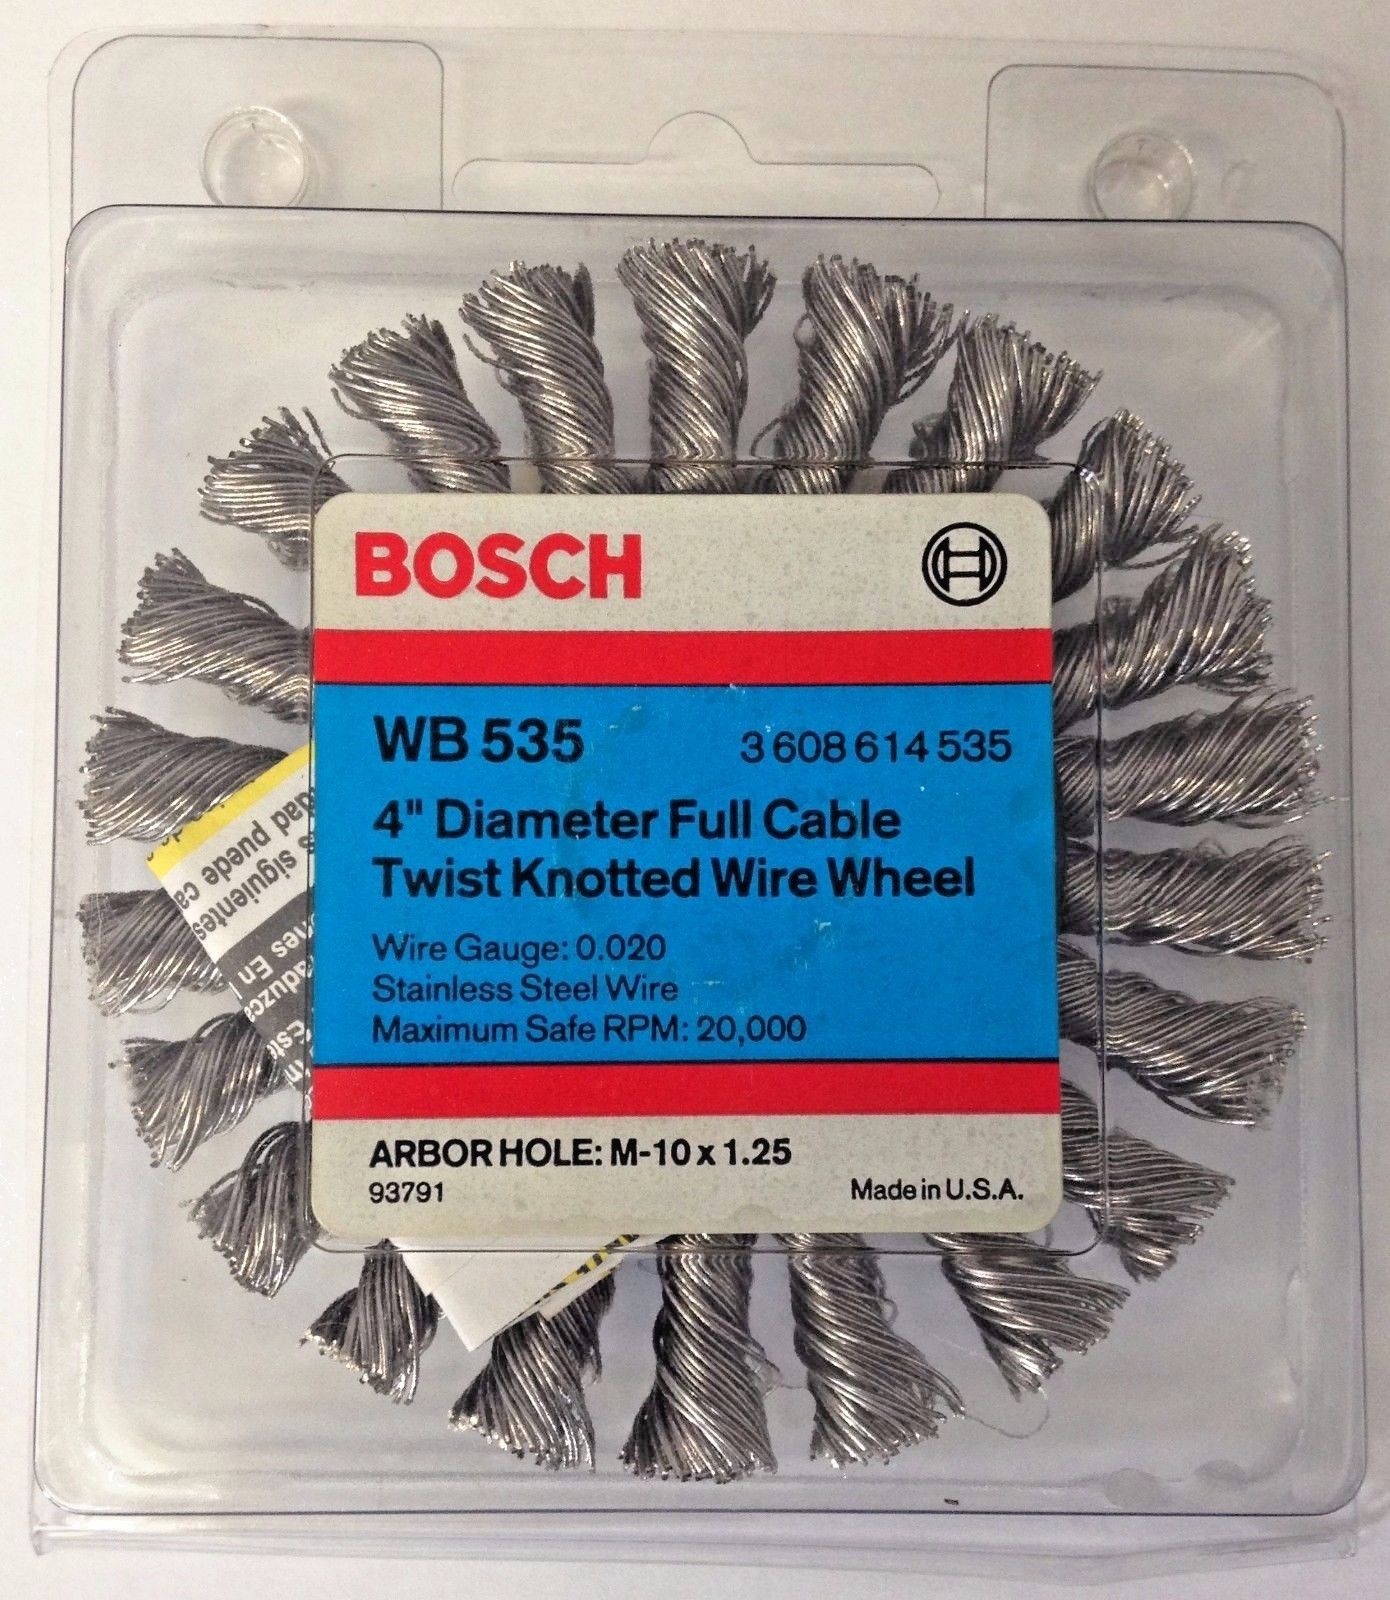 Bosch WB 535 4" Diameter Full Cable Twist Knotted Wire Wheel USA